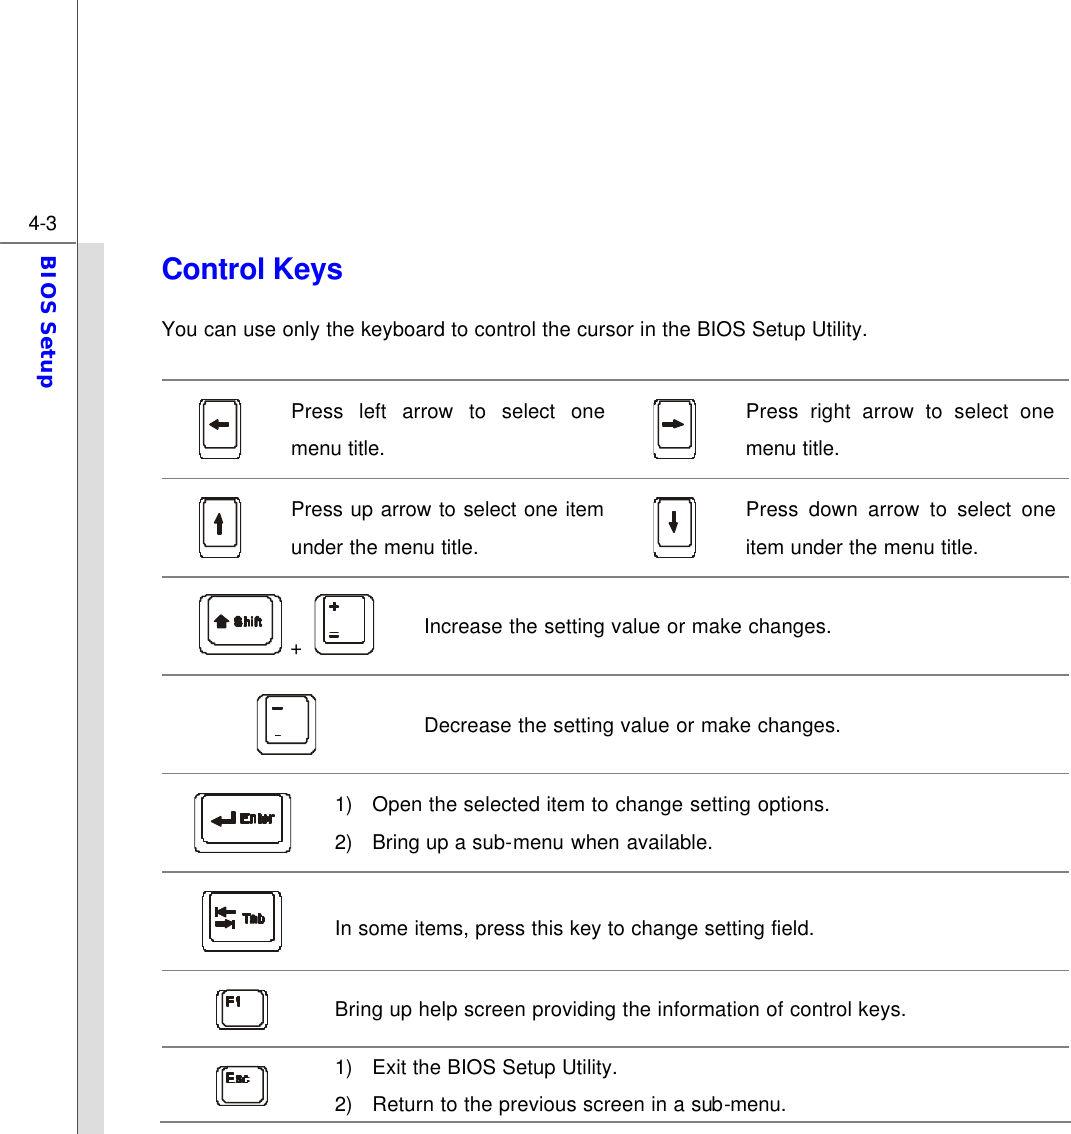  4-3 BIOS Setup  Control Keys You can use only the keyboard to control the cursor in the BIOS Setup Utility.   Press left arrow to select one menu title.  Press right arrow to select one menu title.  Press up arrow to select one item under the menu title.  Press down arrow to select one item under the menu title.  +   Increase the setting value or make changes.  Decrease the setting value or make changes.  1) Open the selected item to change setting options. 2) Bring up a sub-menu when available.  In some items, press this key to change setting field.  Bring up help screen providing the information of control keys.  1) Exit the BIOS Setup Utility. 2) Return to the previous screen in a sub-menu. 